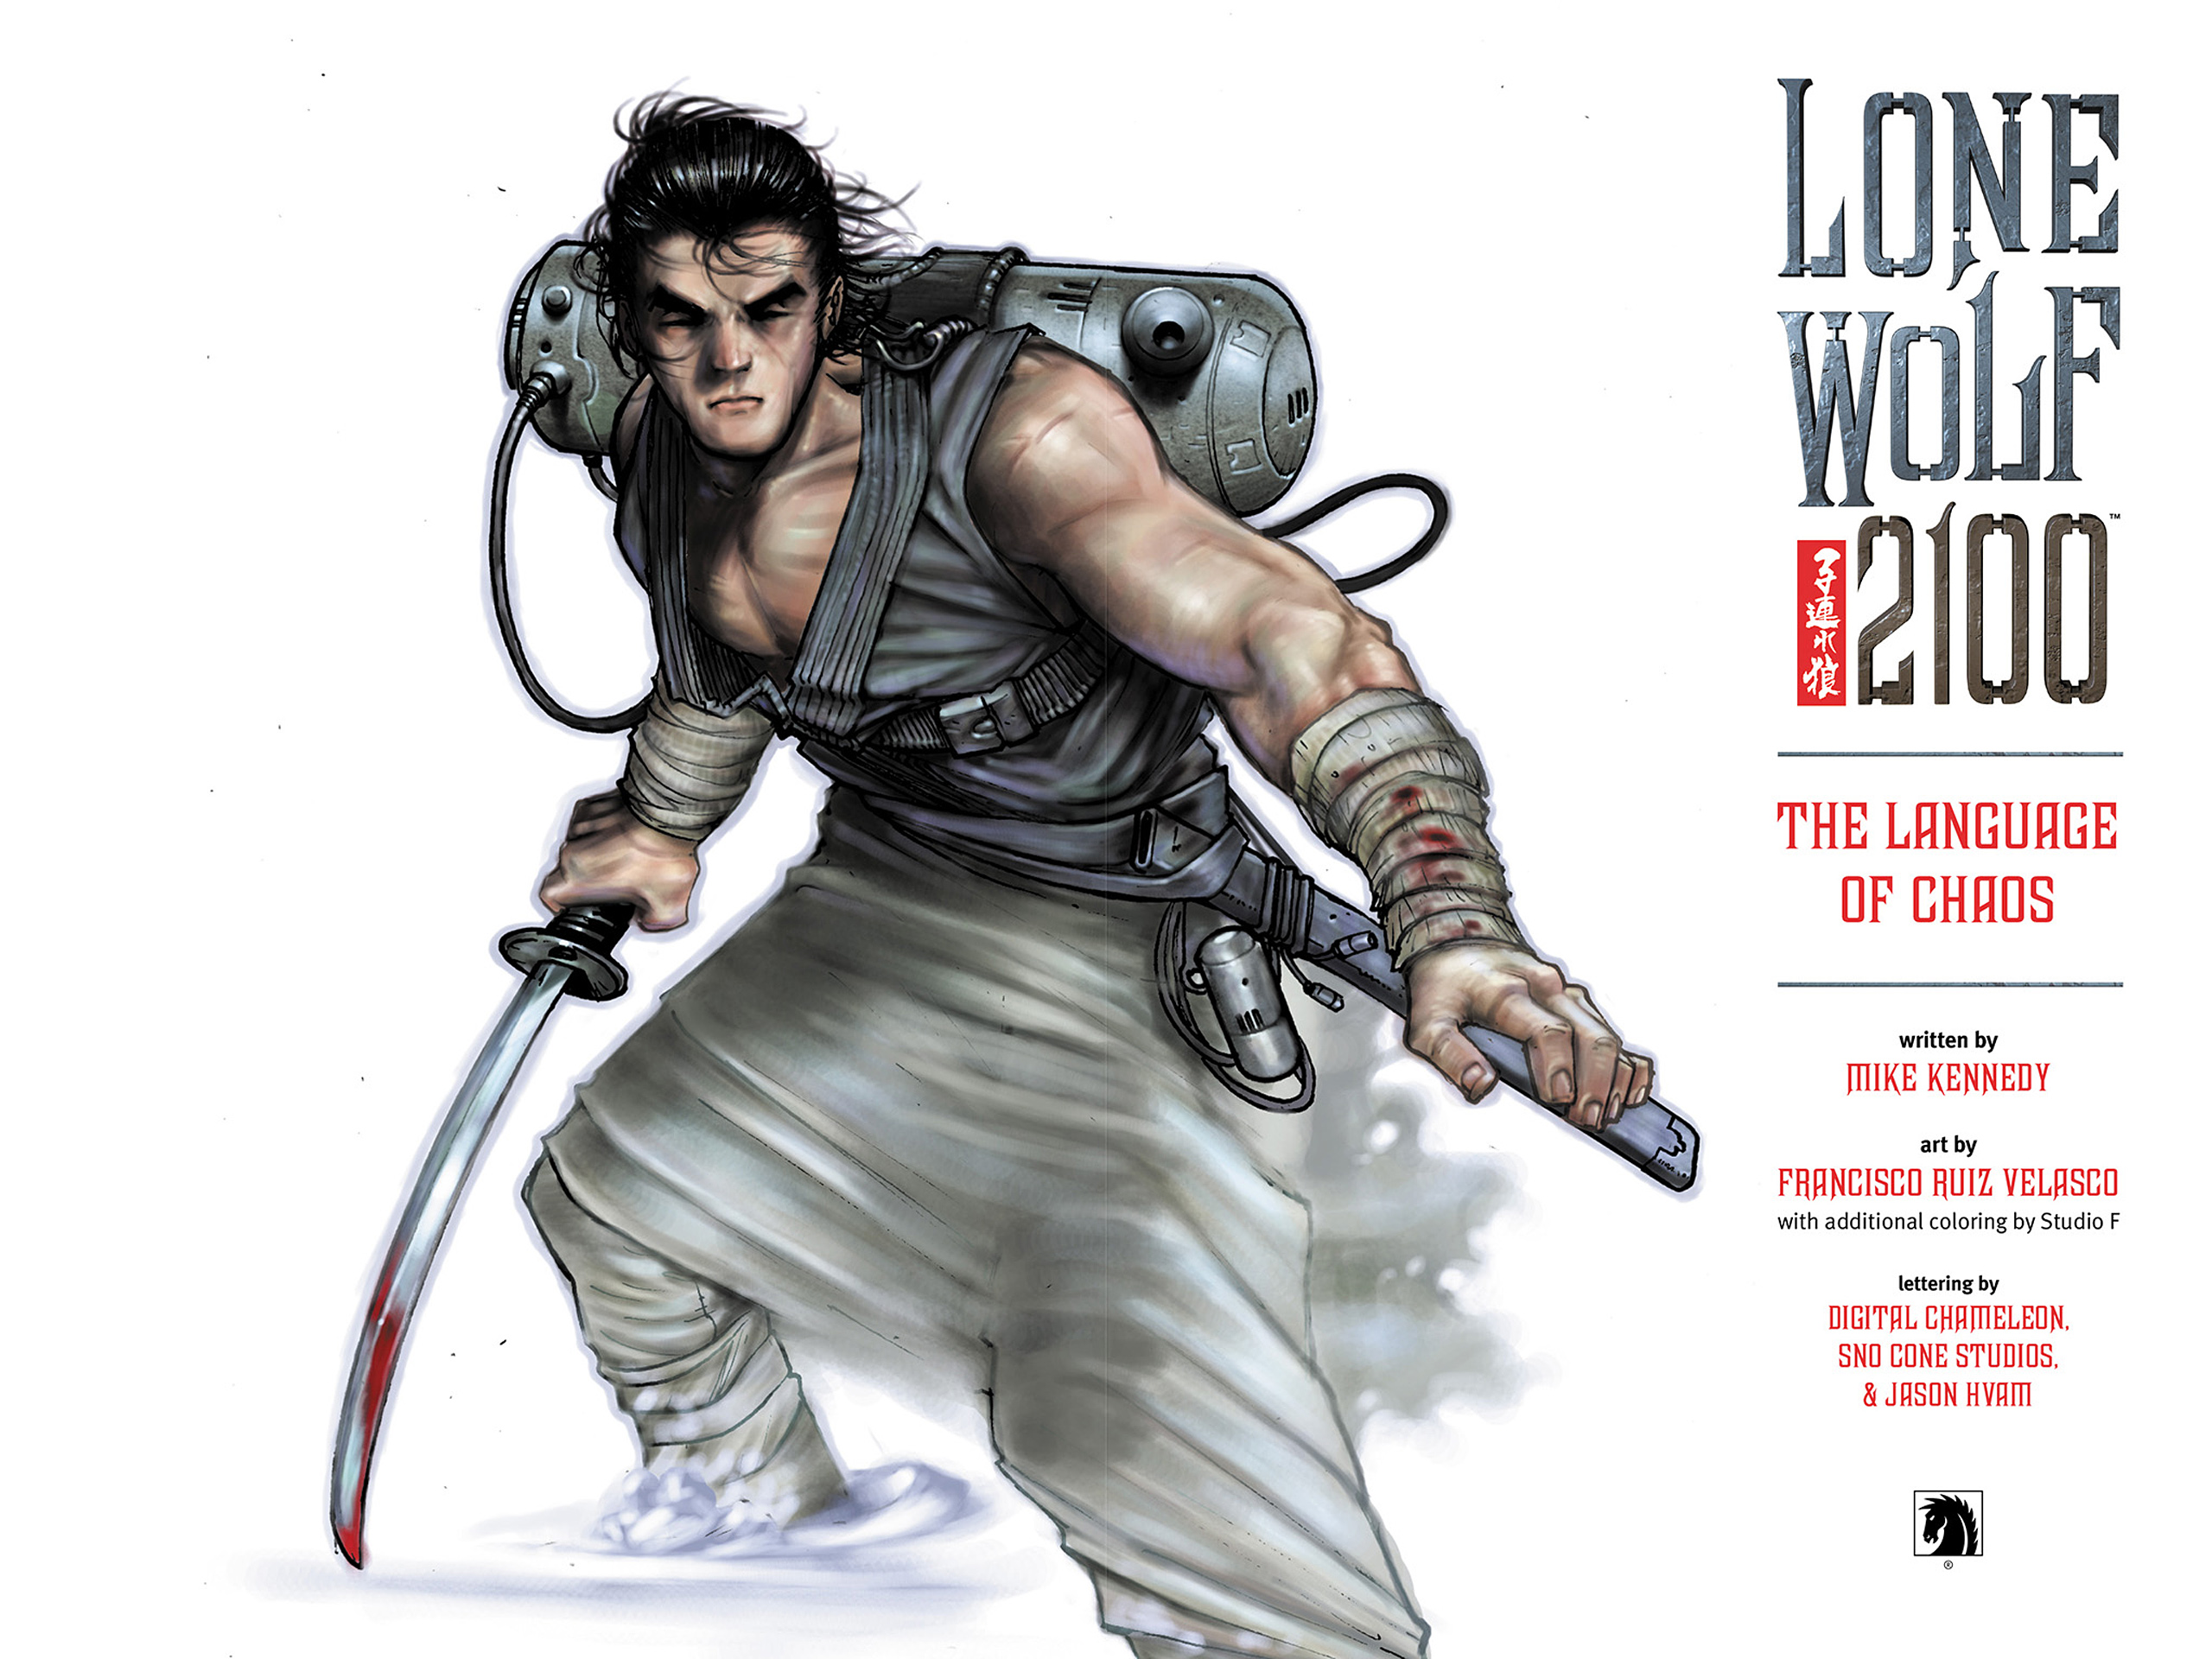 Read online Lone Wolf 2100 comic -  Issue # TPB 2 - 3